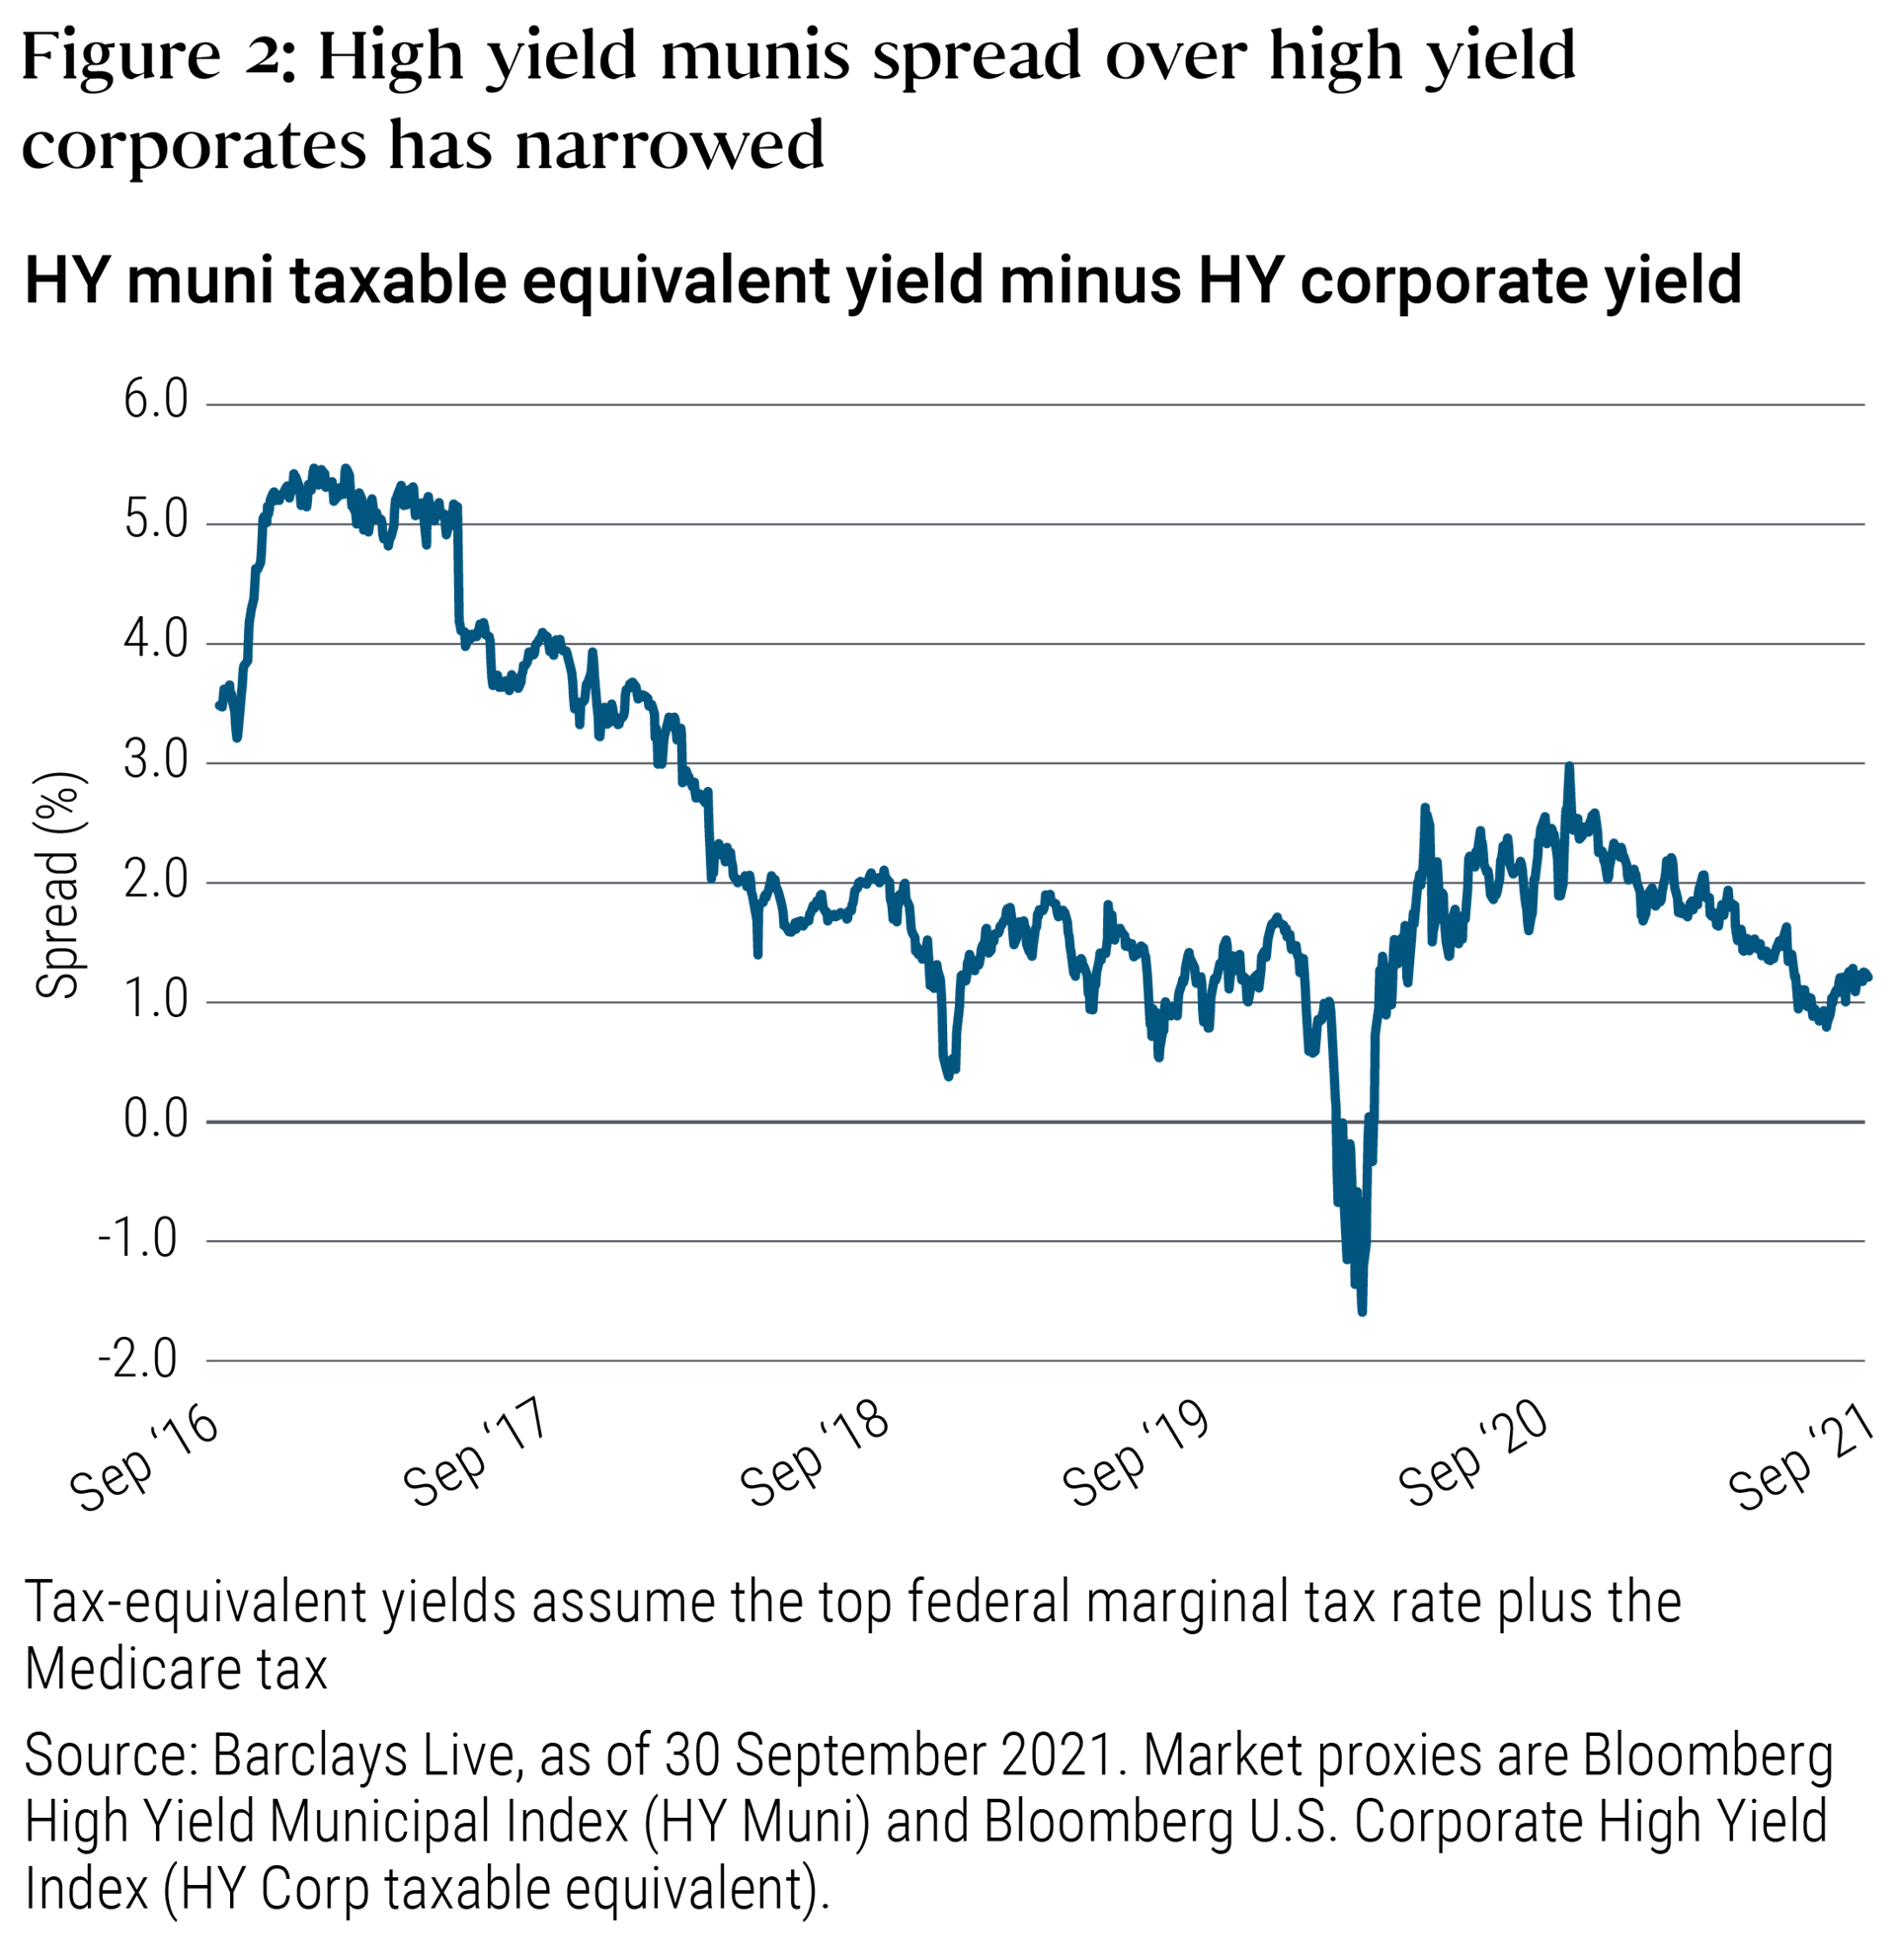 Figure 2. High yield munis spread over high yield corporates has narrowed